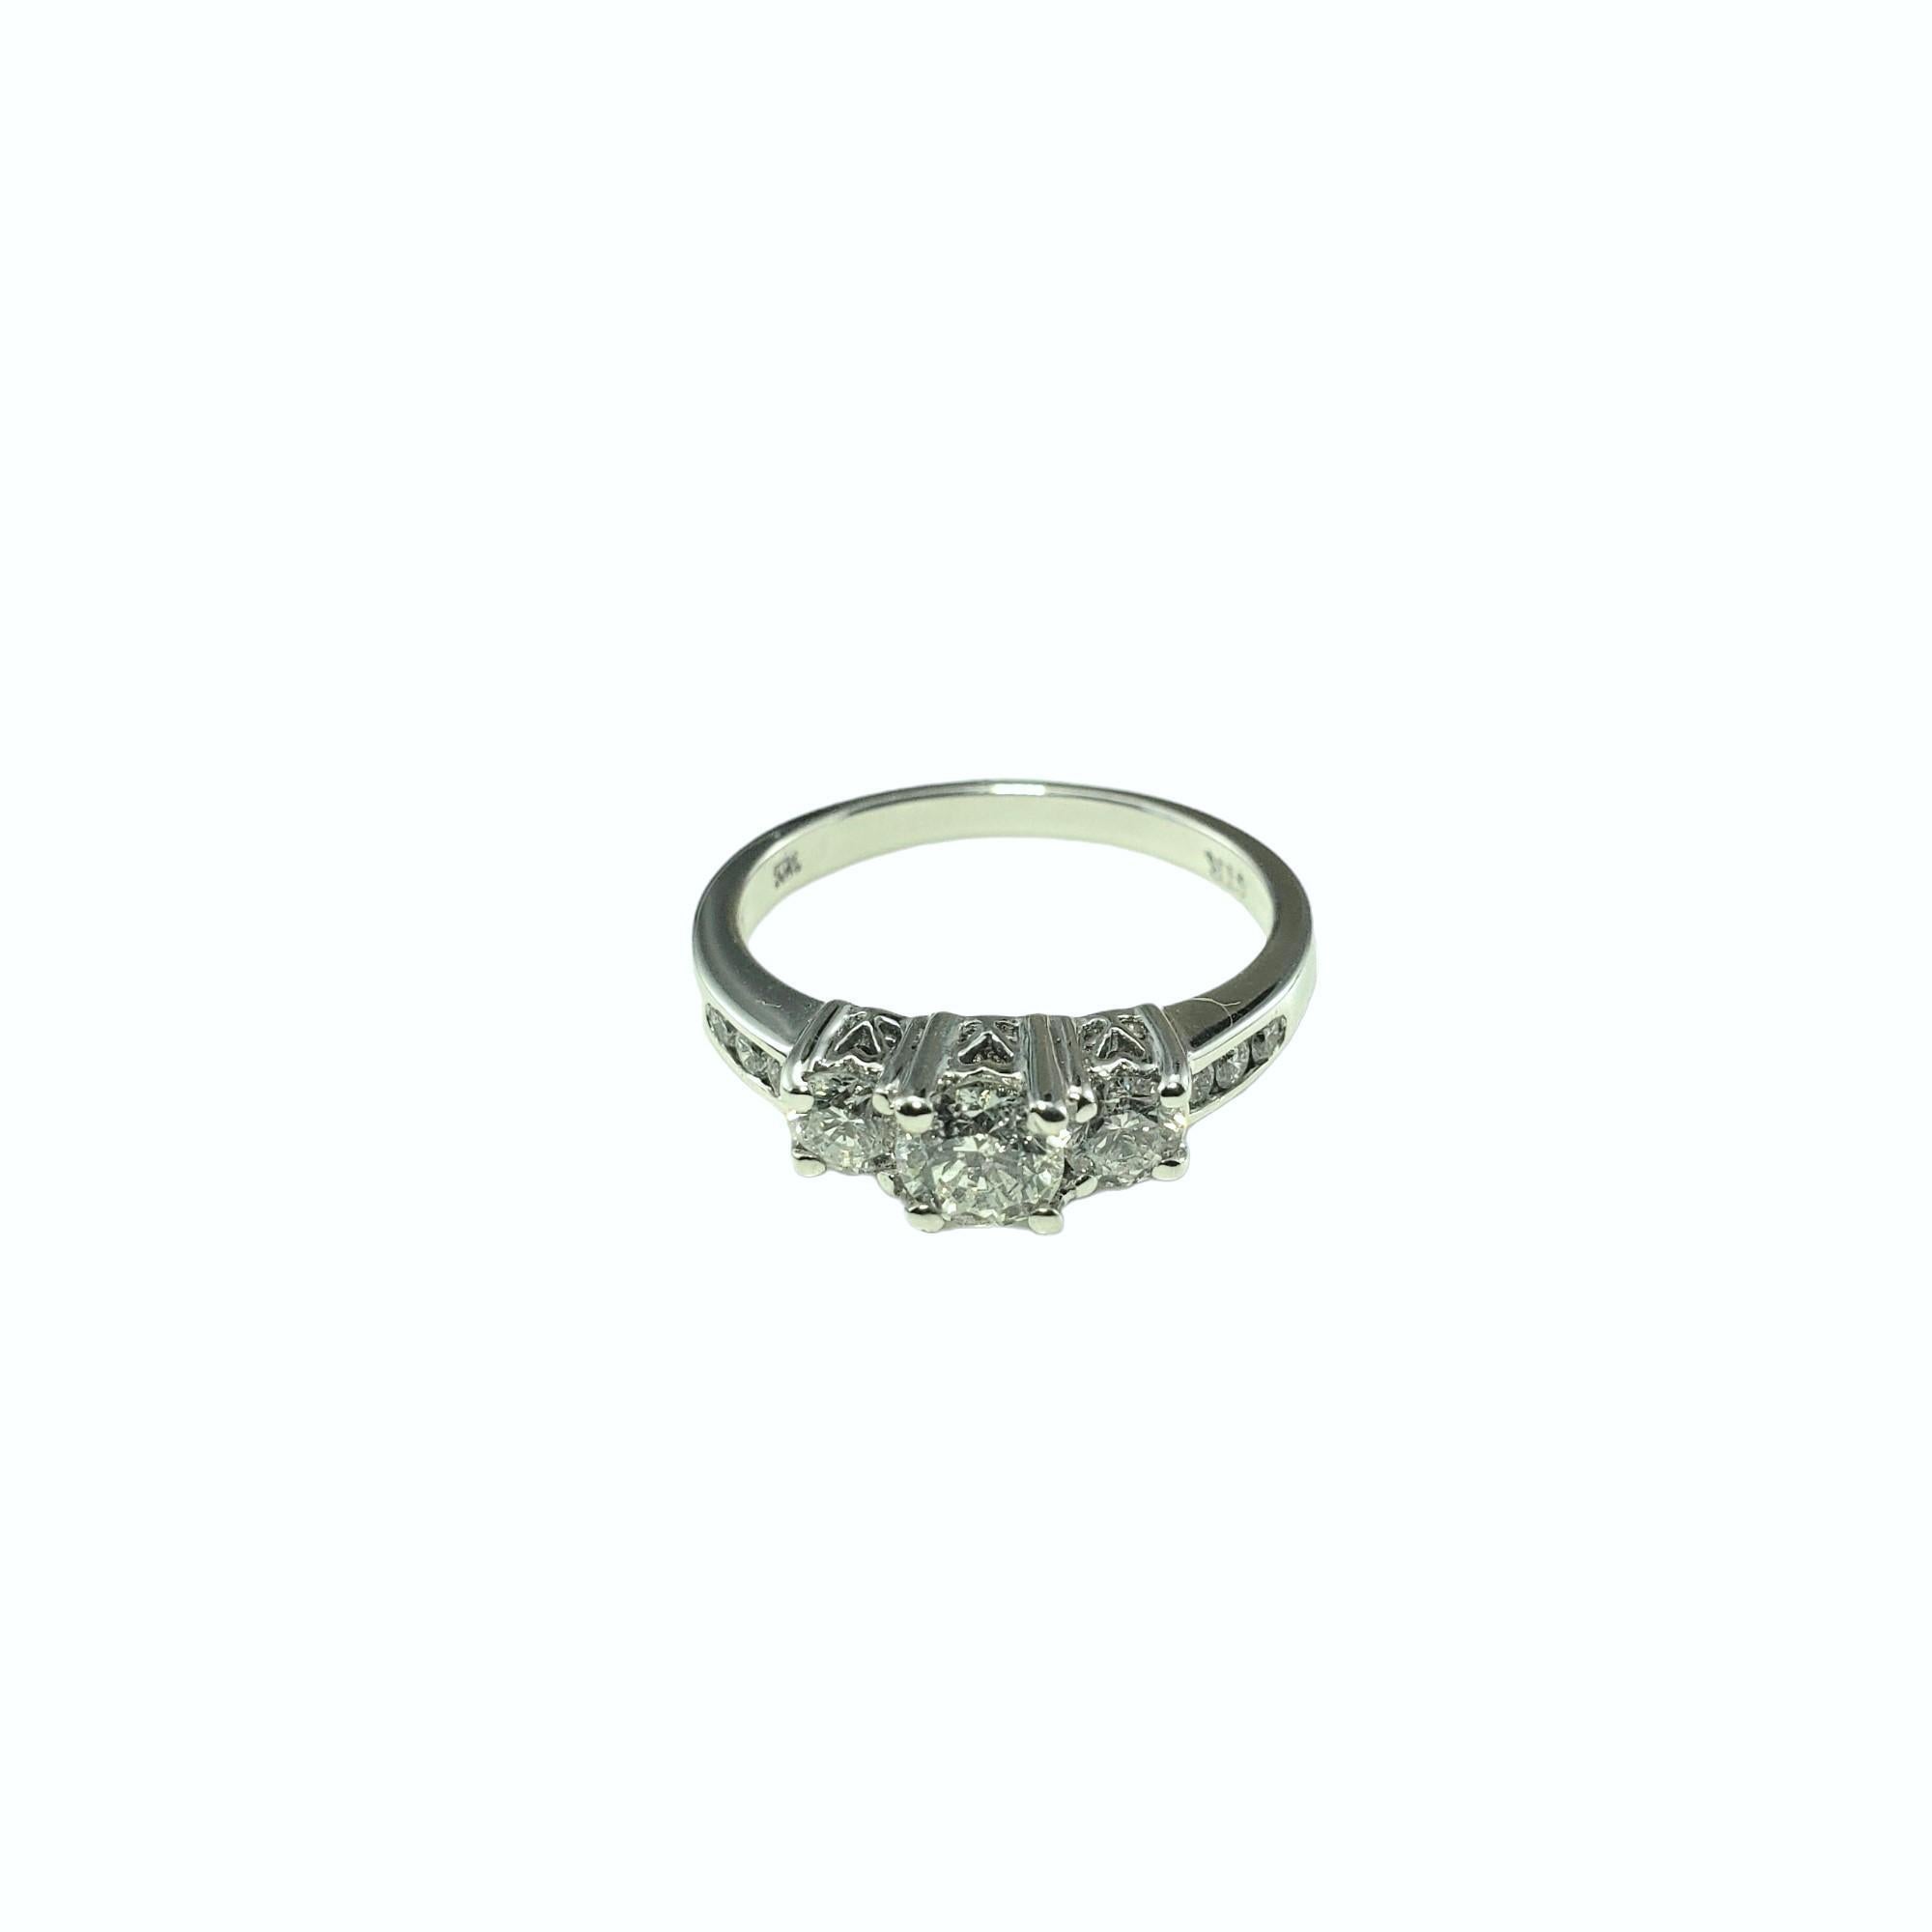 14 Karat White Gold Diamond Past, Present and Future Ring Size 7-

This sparkling ring features nine round brilliant cut diamonds (center: .50 ct.) set in beautifully detailed 14K white gold.  Width:  5 mm.  Shank:  2.1 mm.

Approximate total